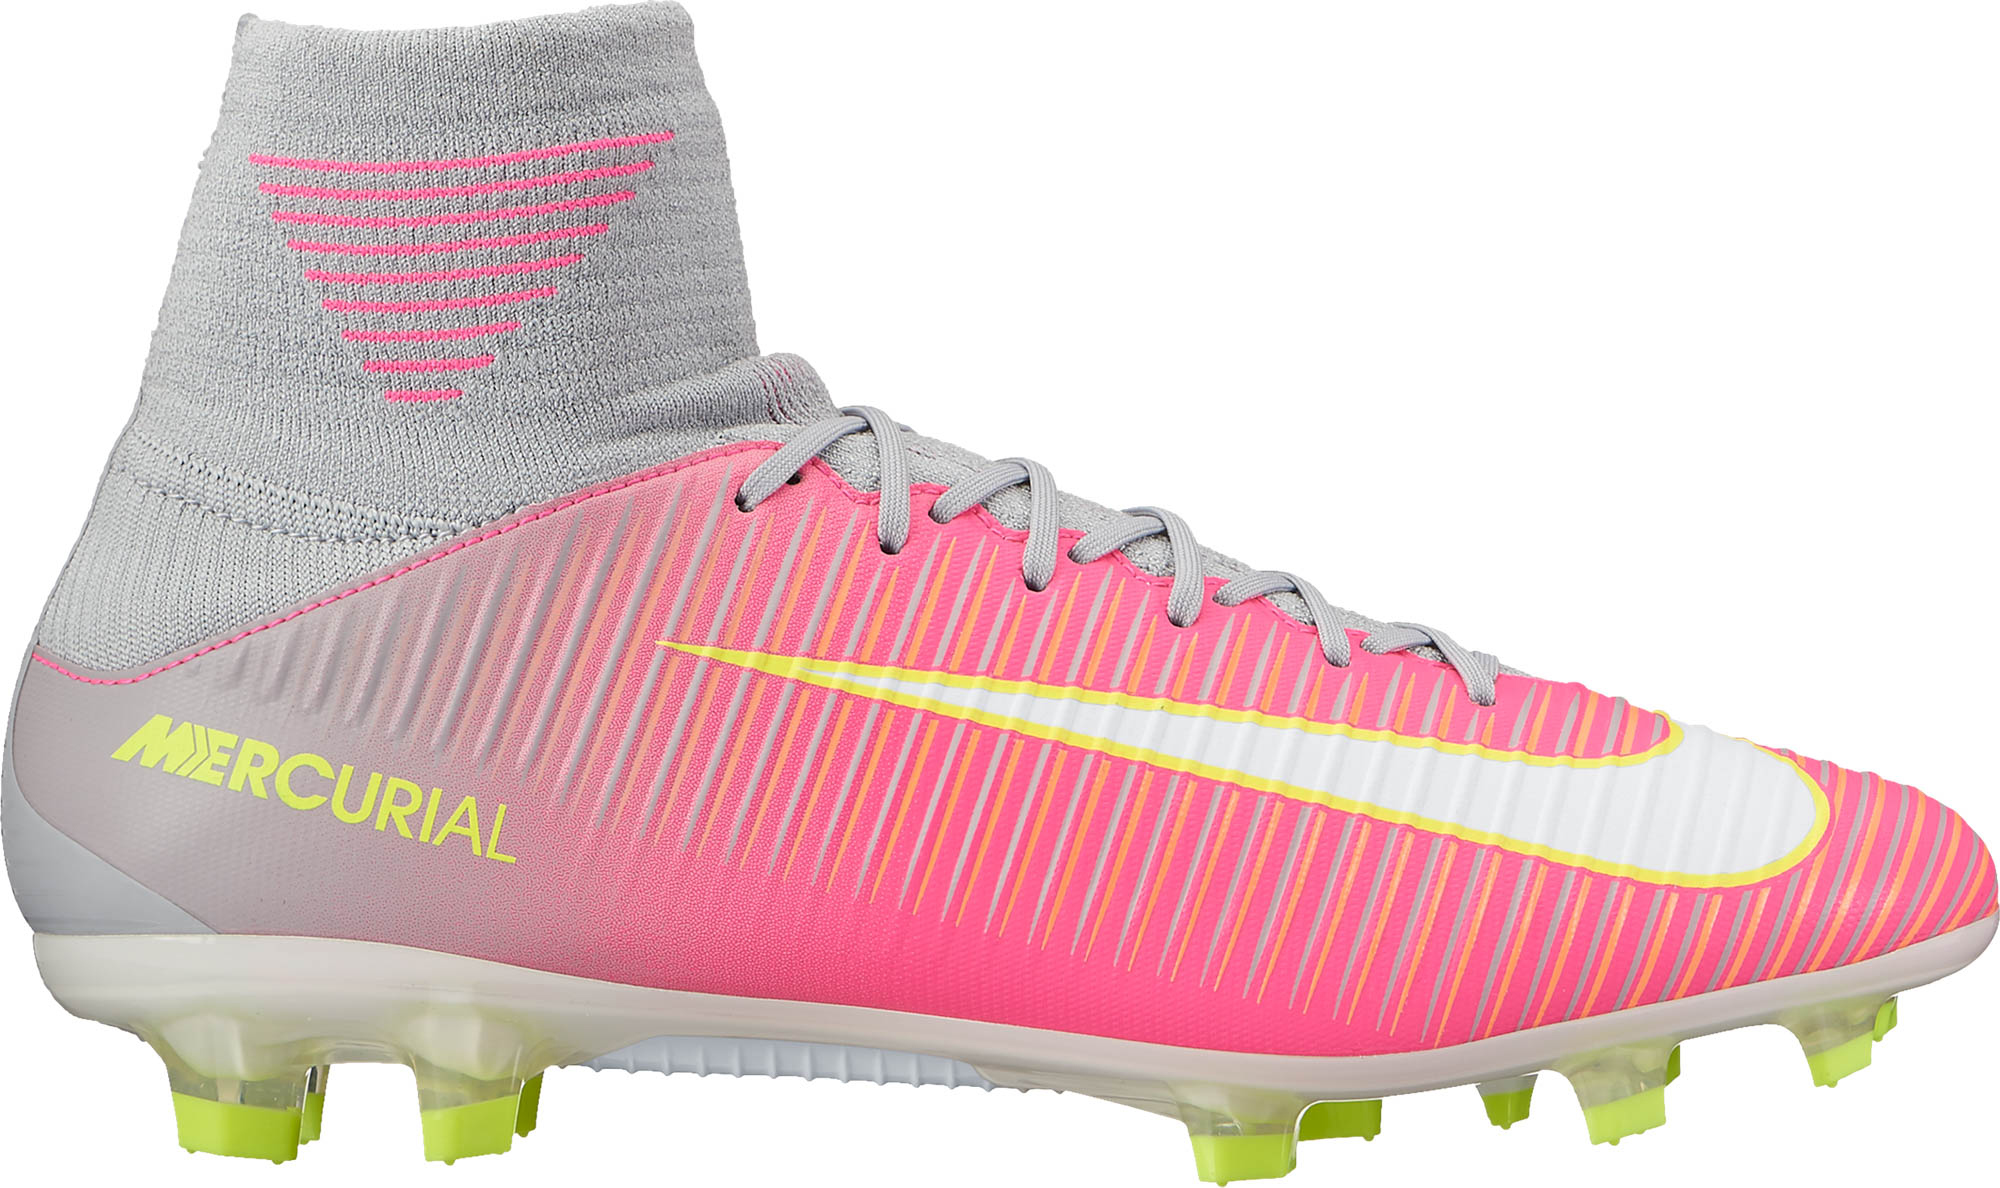 Nike Mercurial Veloce lll DF FG - Soccer Cleats